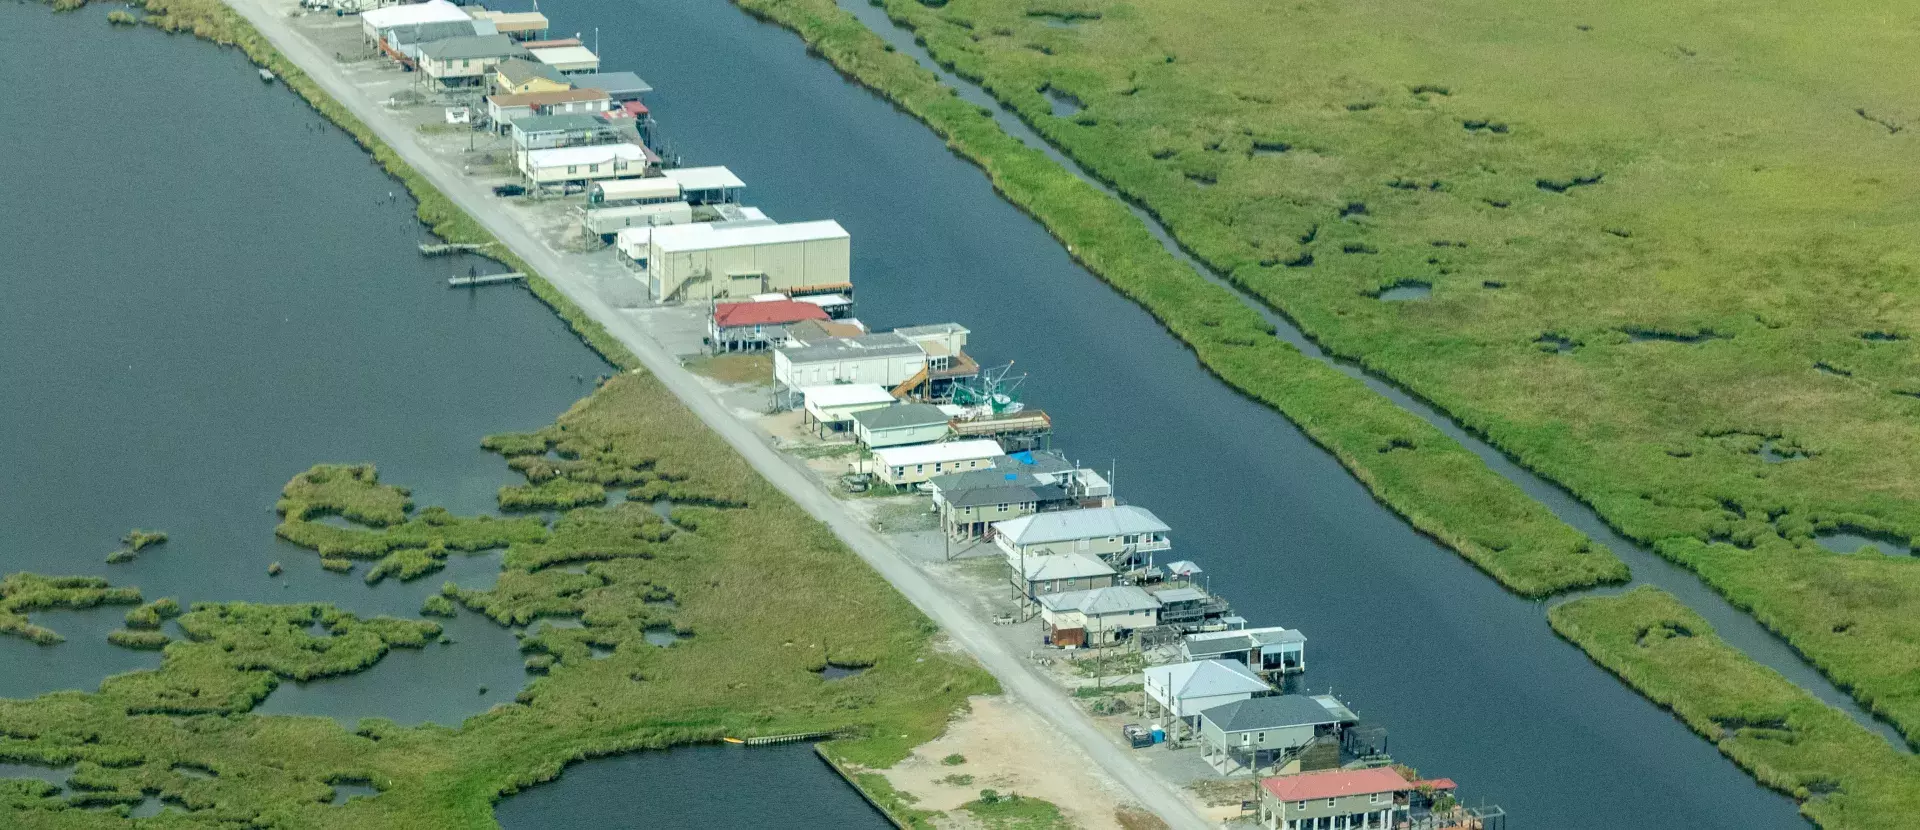 A row of houses in wetlands surrounded by water